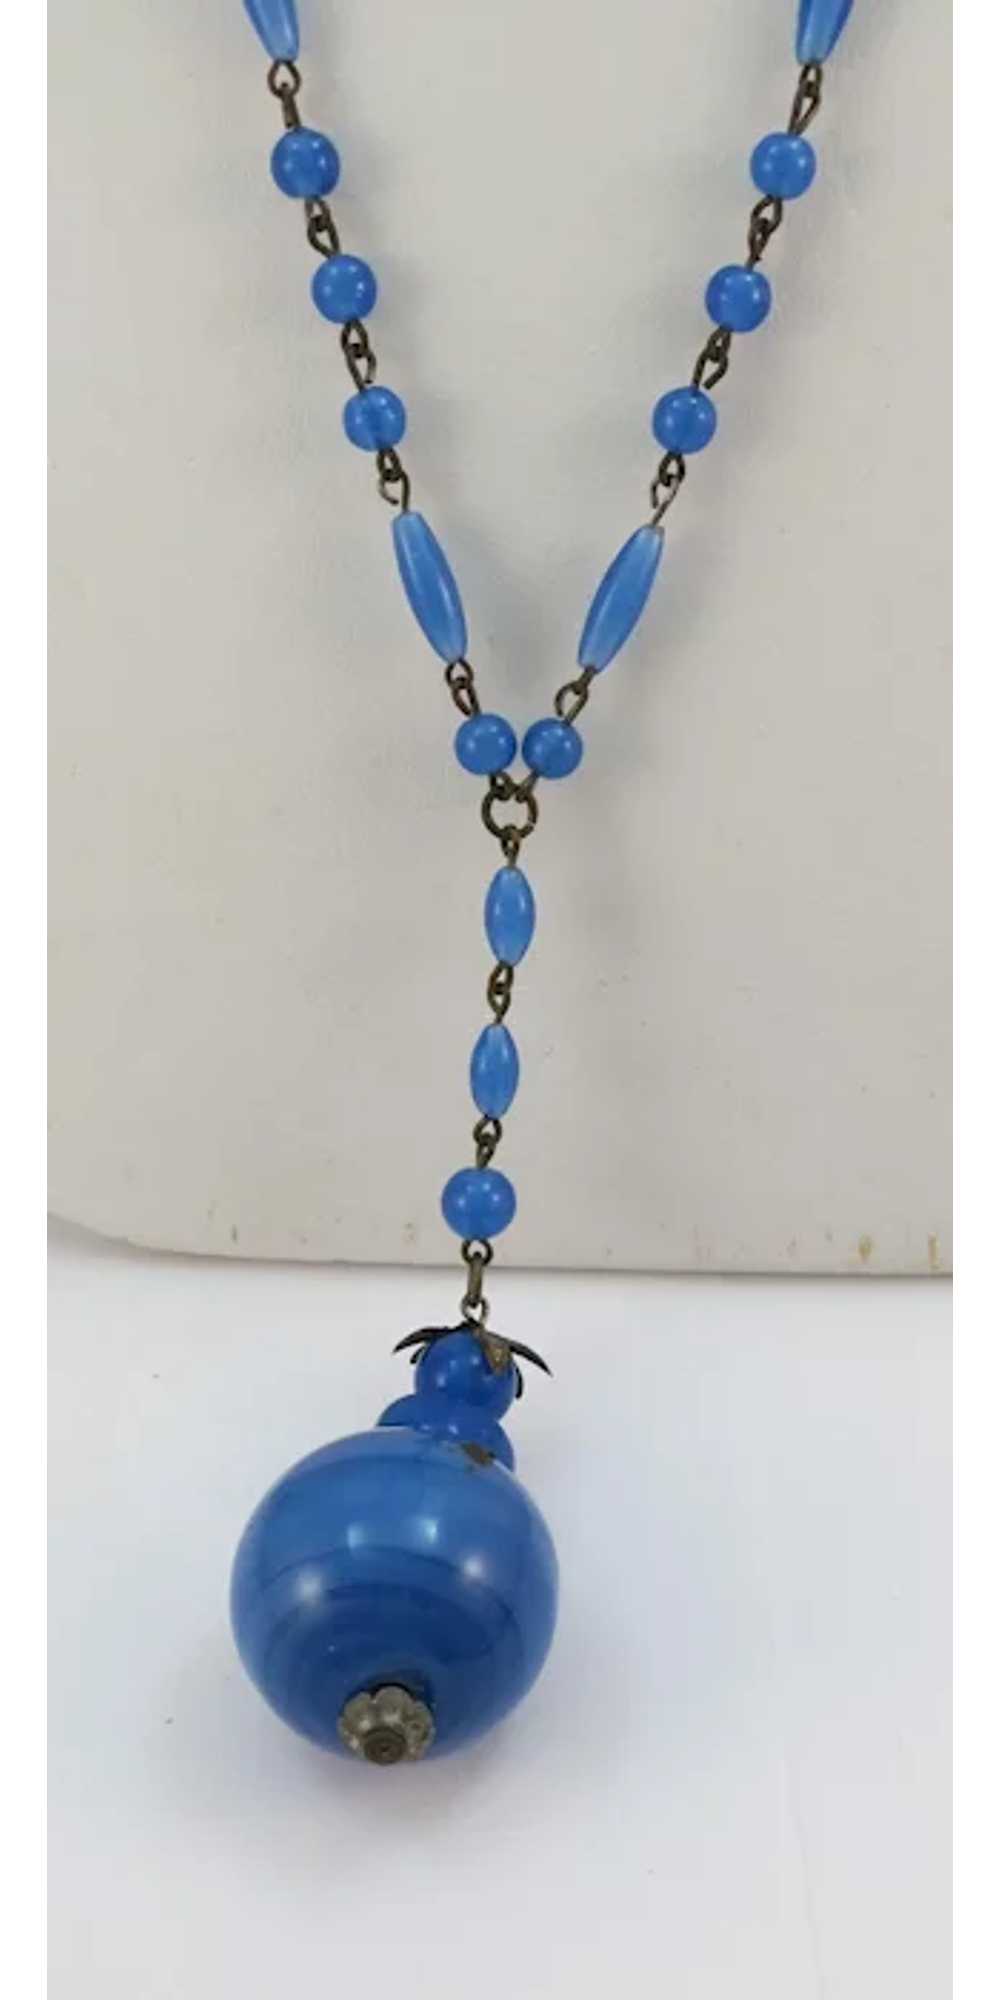 VINTAGE Blue Glass Bead Necklace with Glass MO_JO - image 4